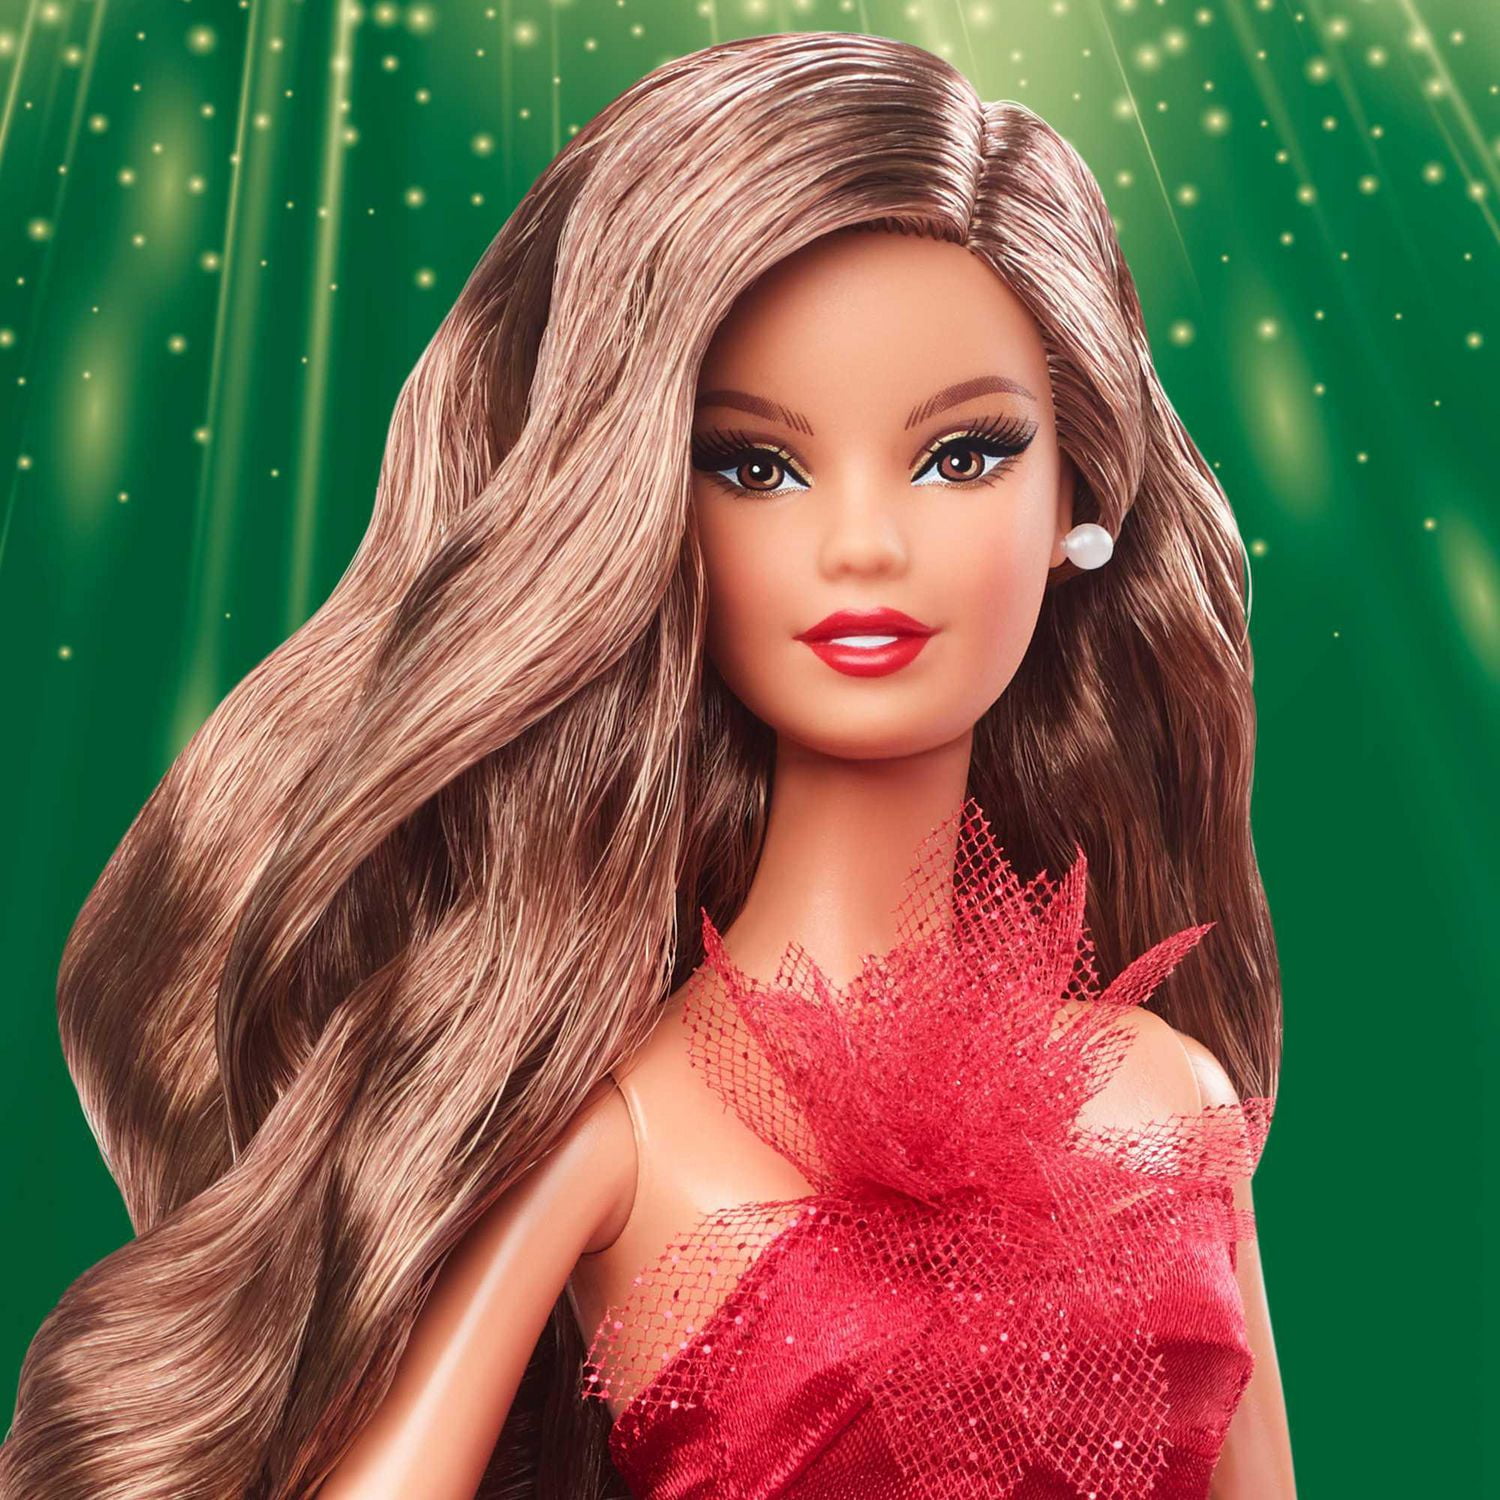 ad barbie goes to the hair salon look with @Armani beauty products